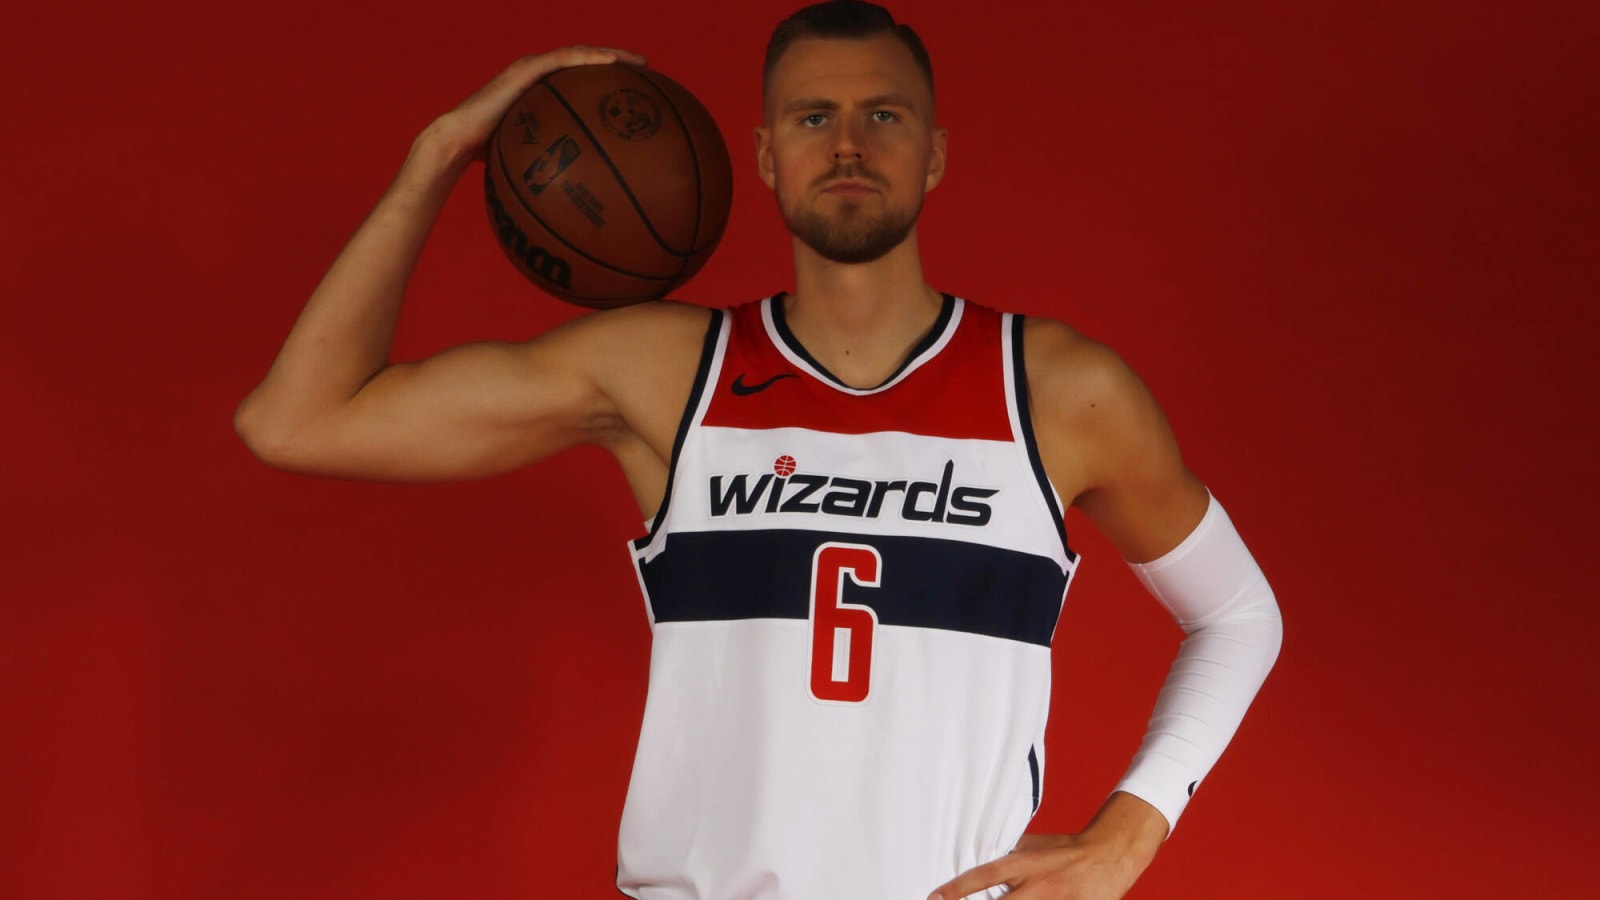 Kristaps Porzingis Feels "He Is A Great Fit" Next To Bradley Beal And Kyle Kuzma On Wizards